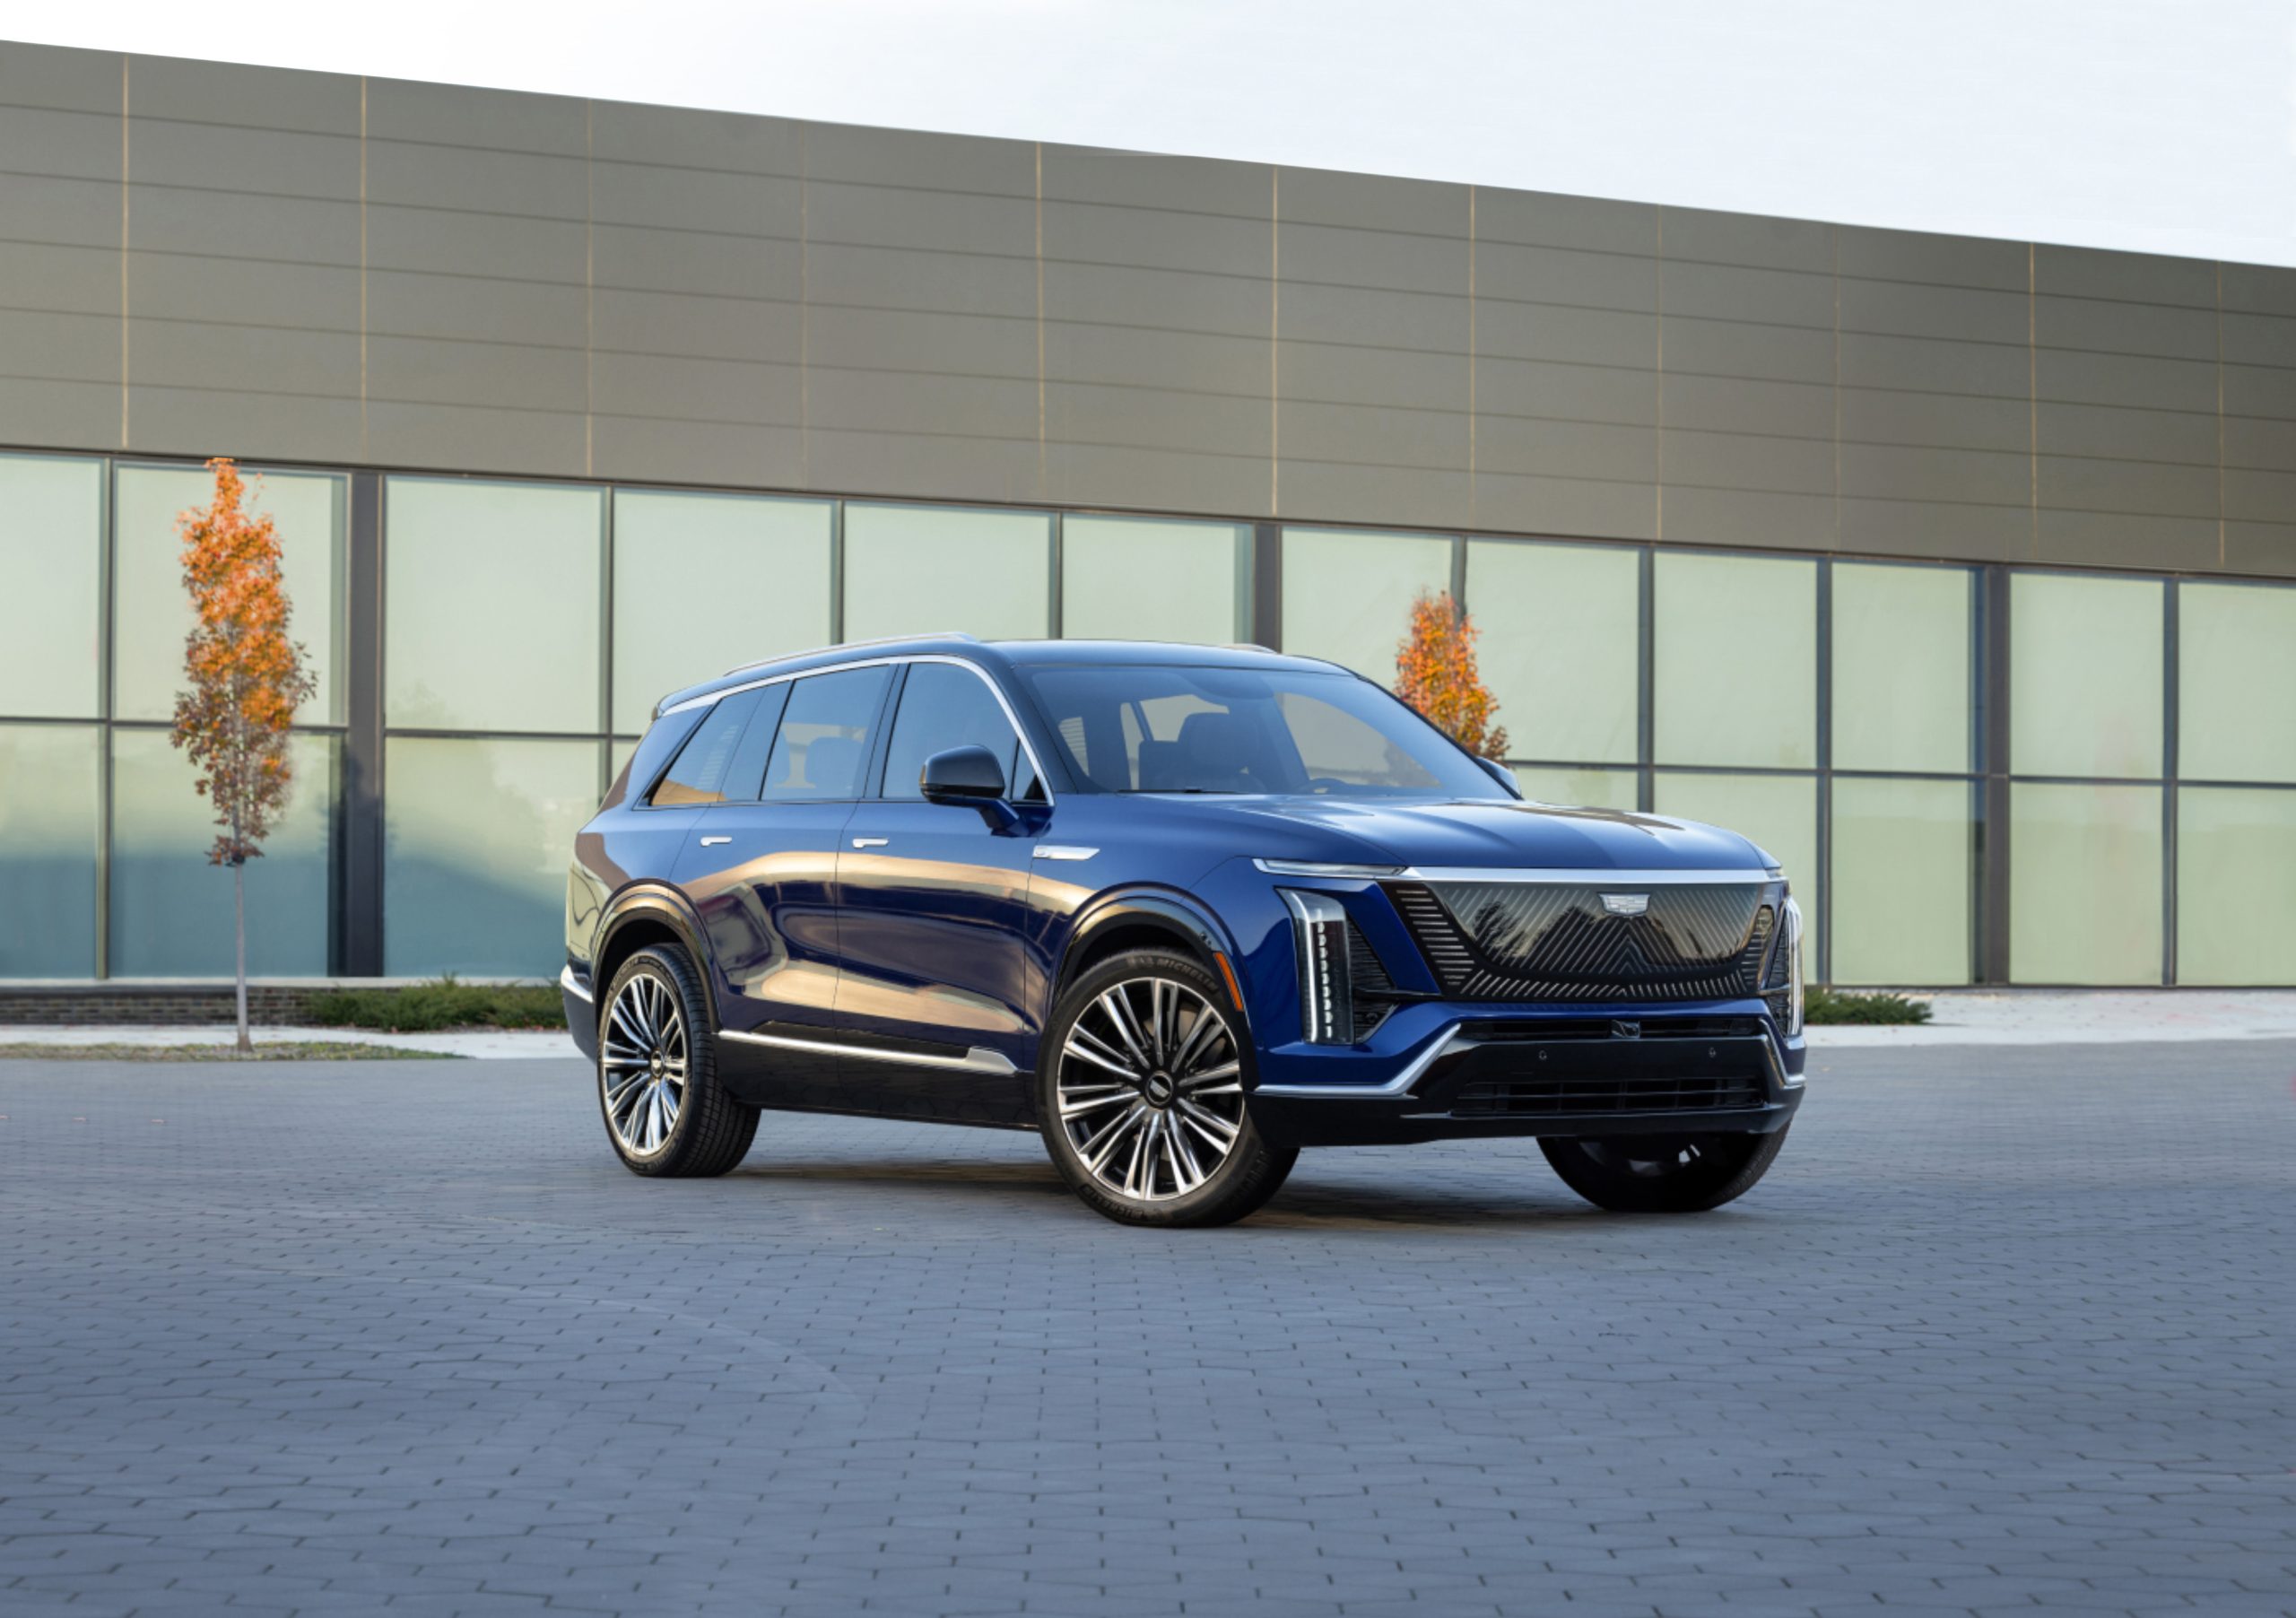 Cadillac adds VISTIQ to lineup for 2026